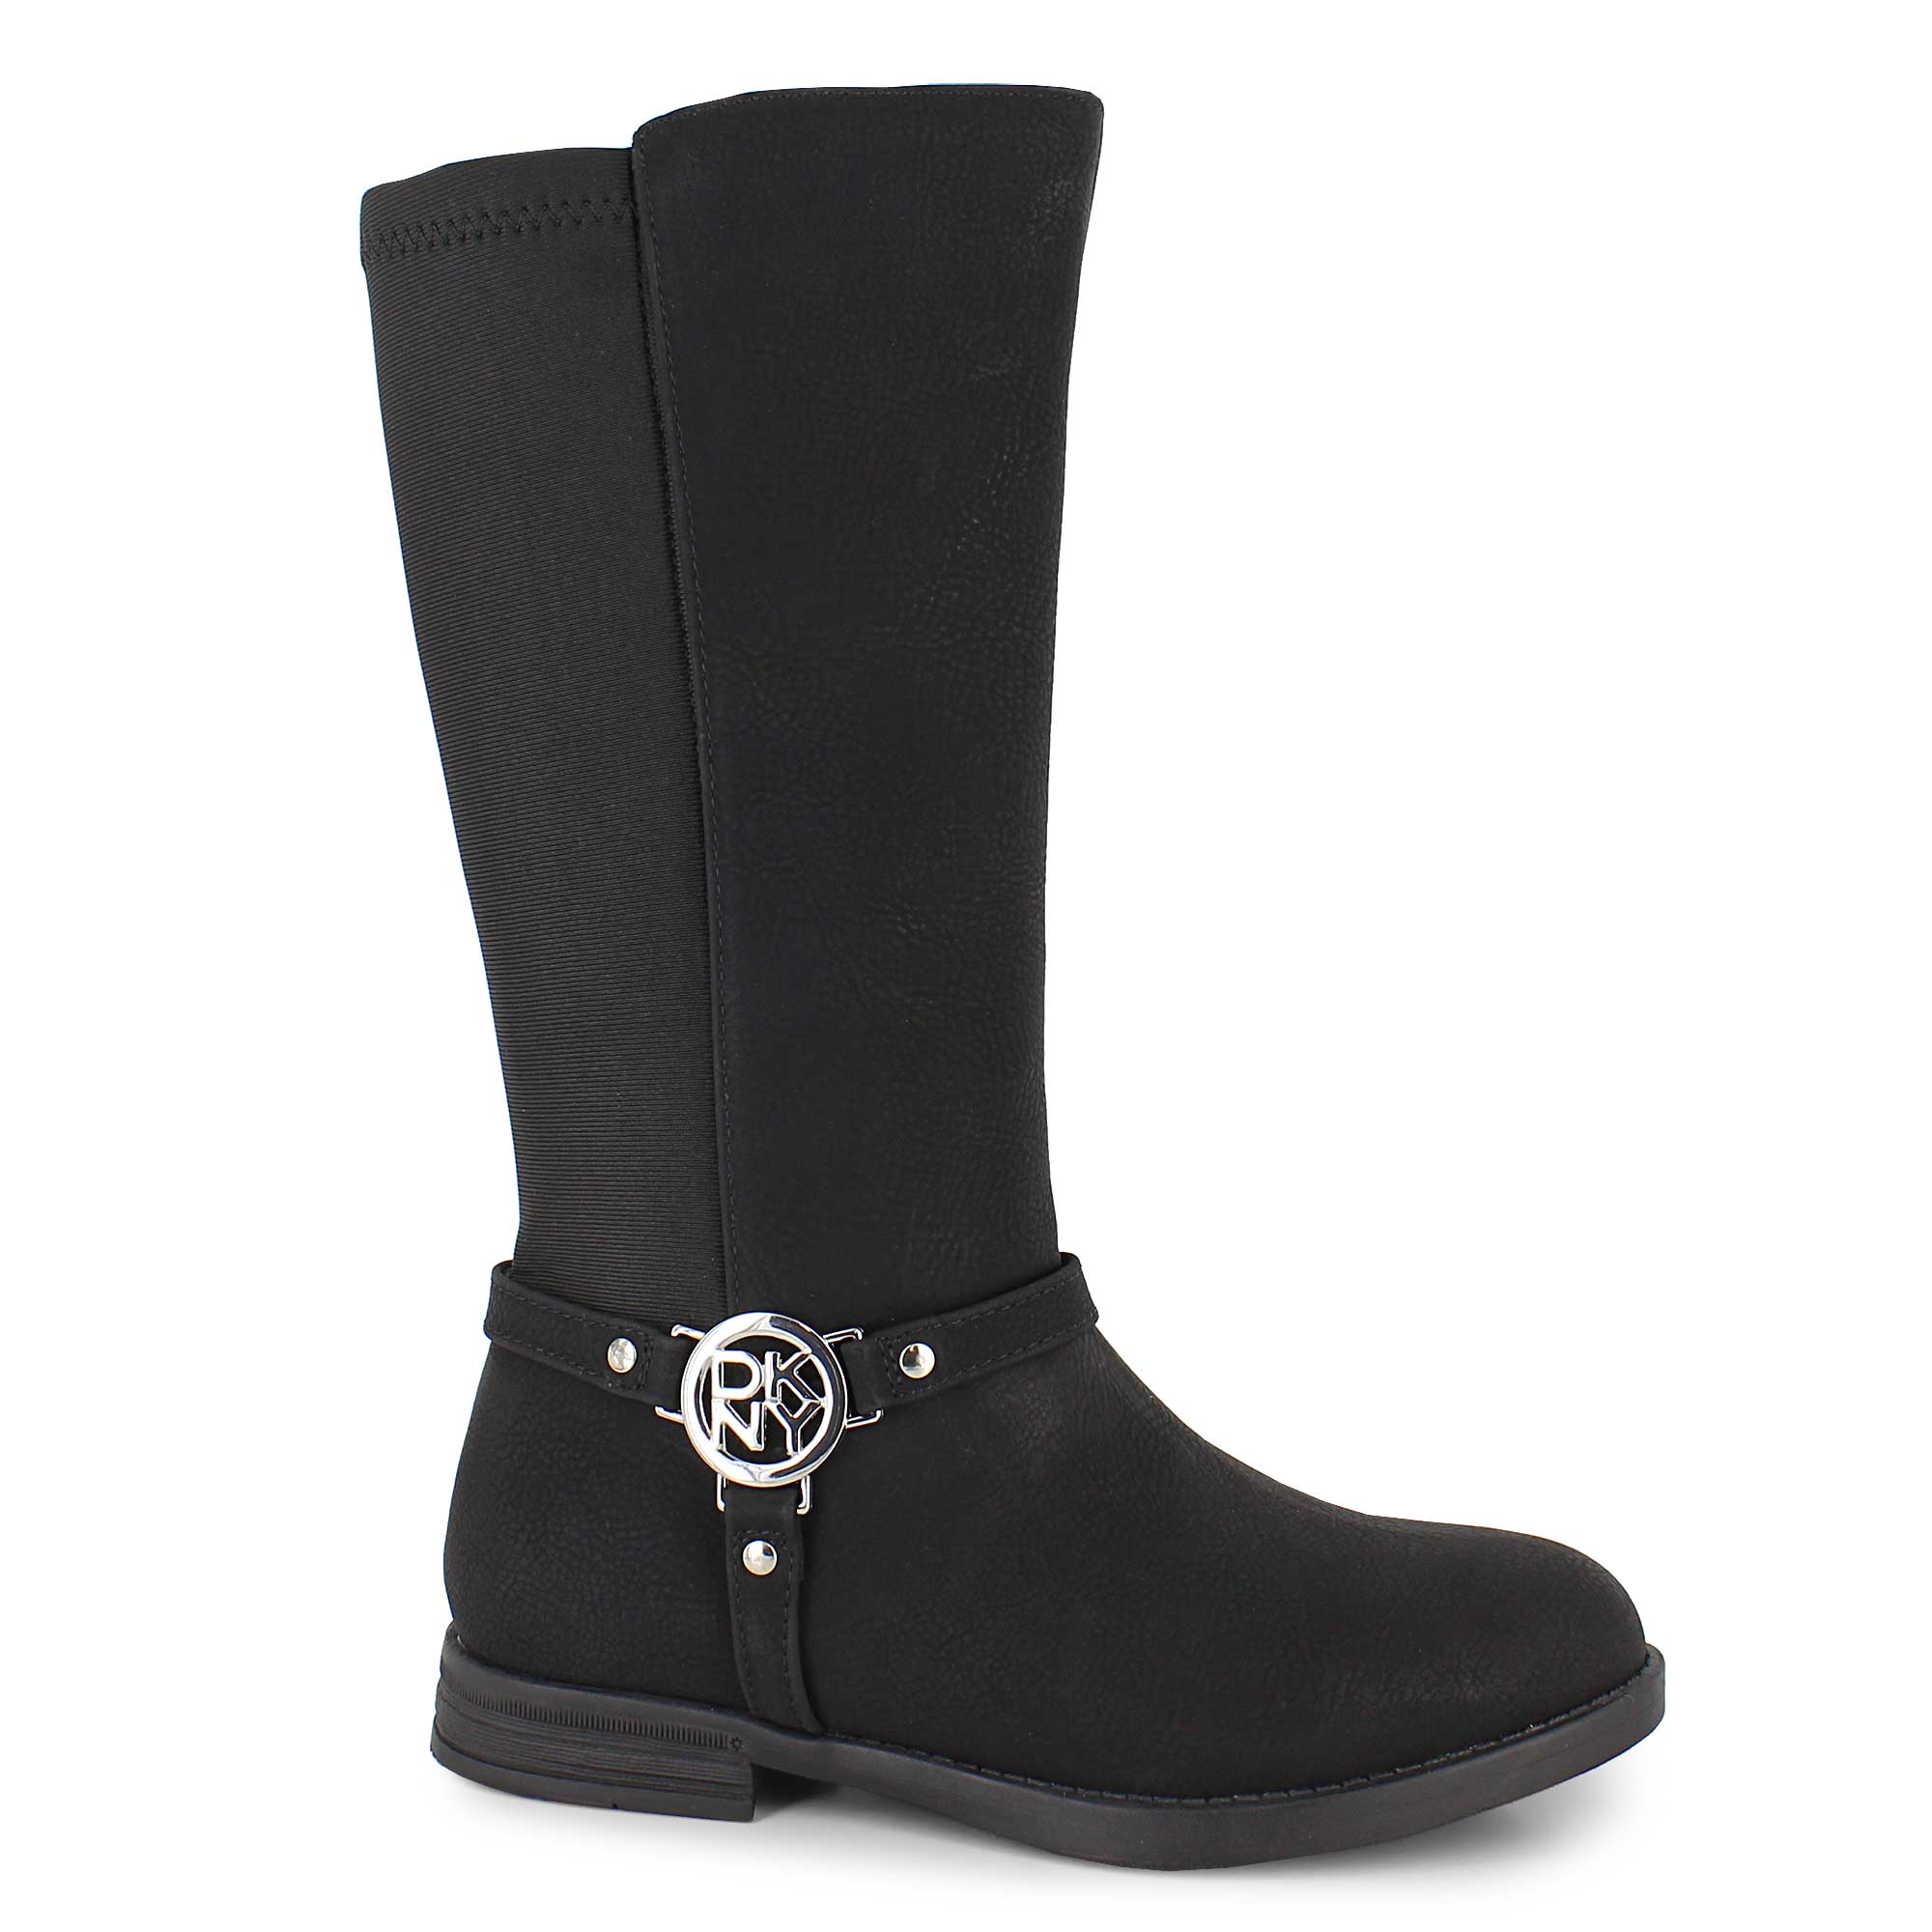 Tall Boots | Shop Now at SHOE SHOW